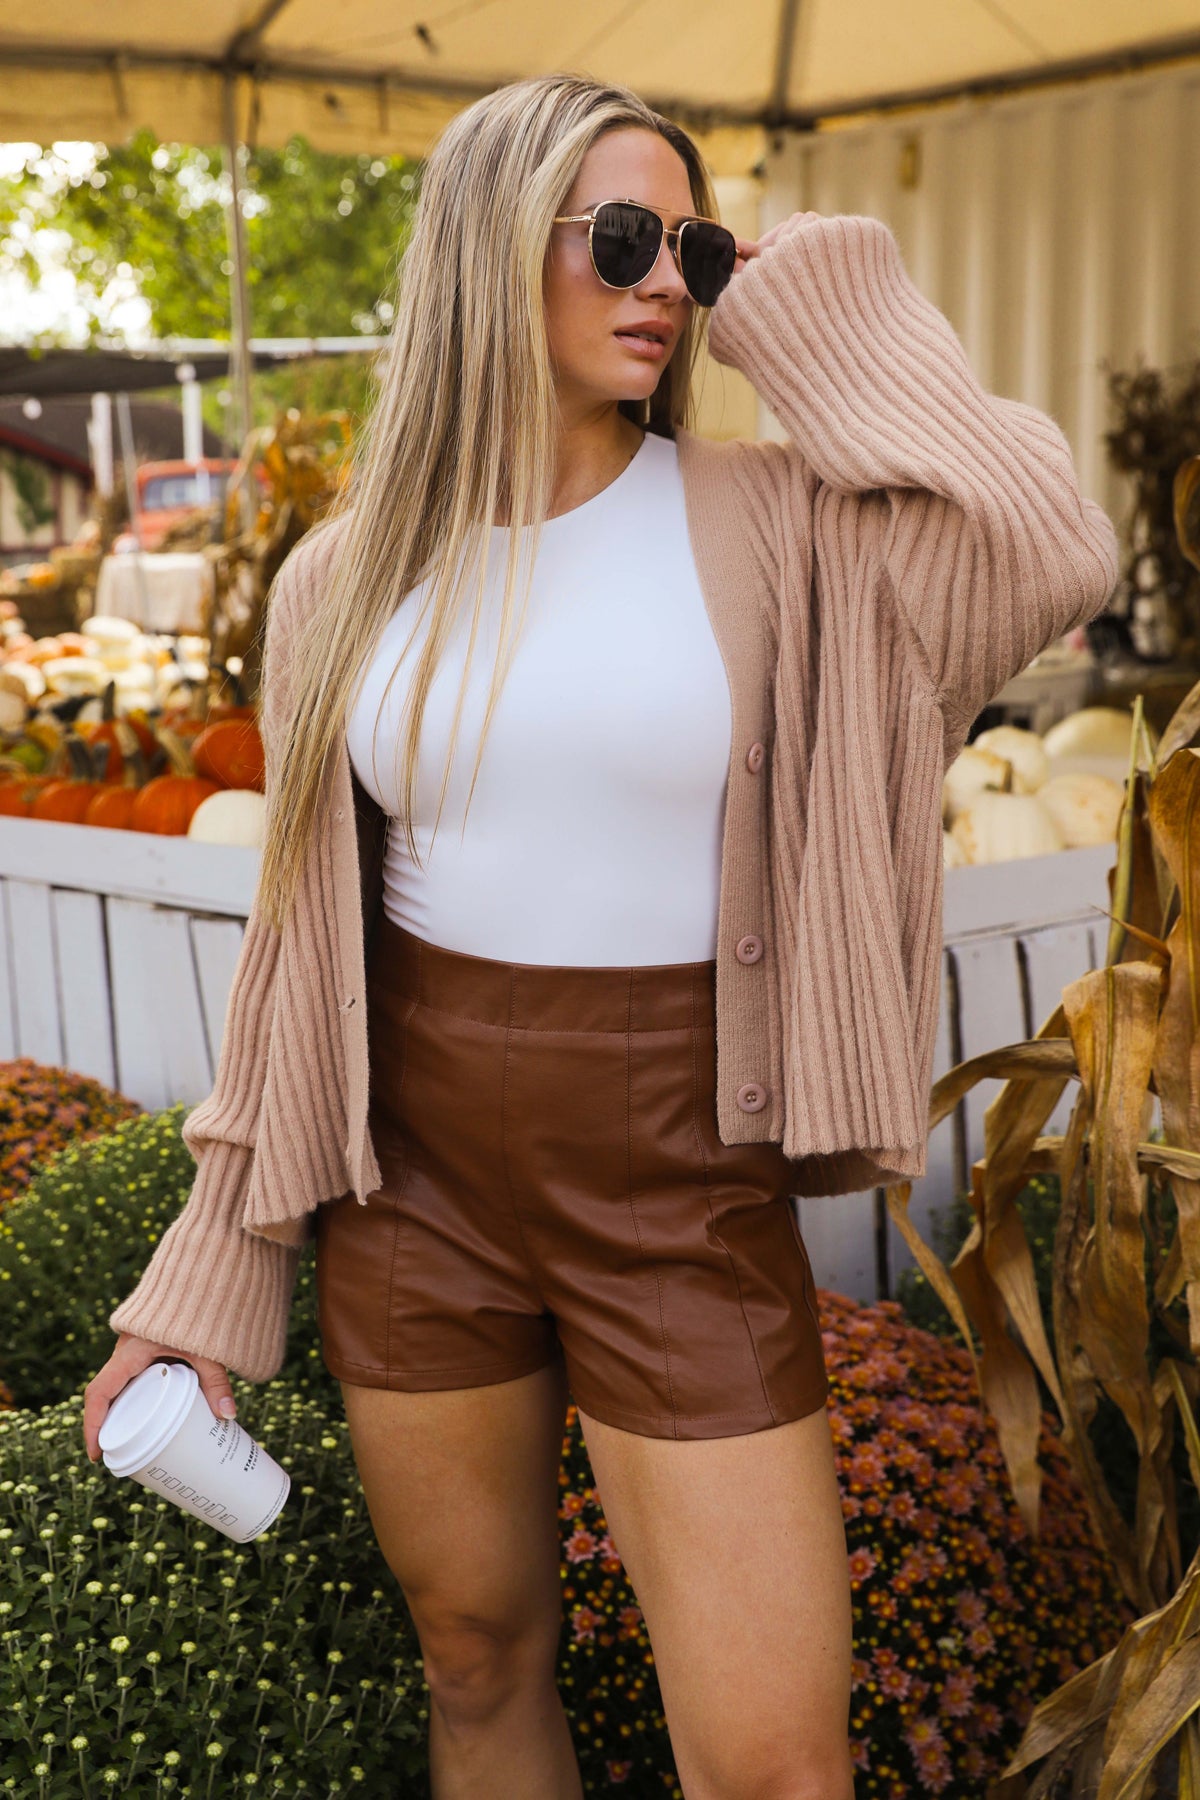 brown shorts outfit ideas